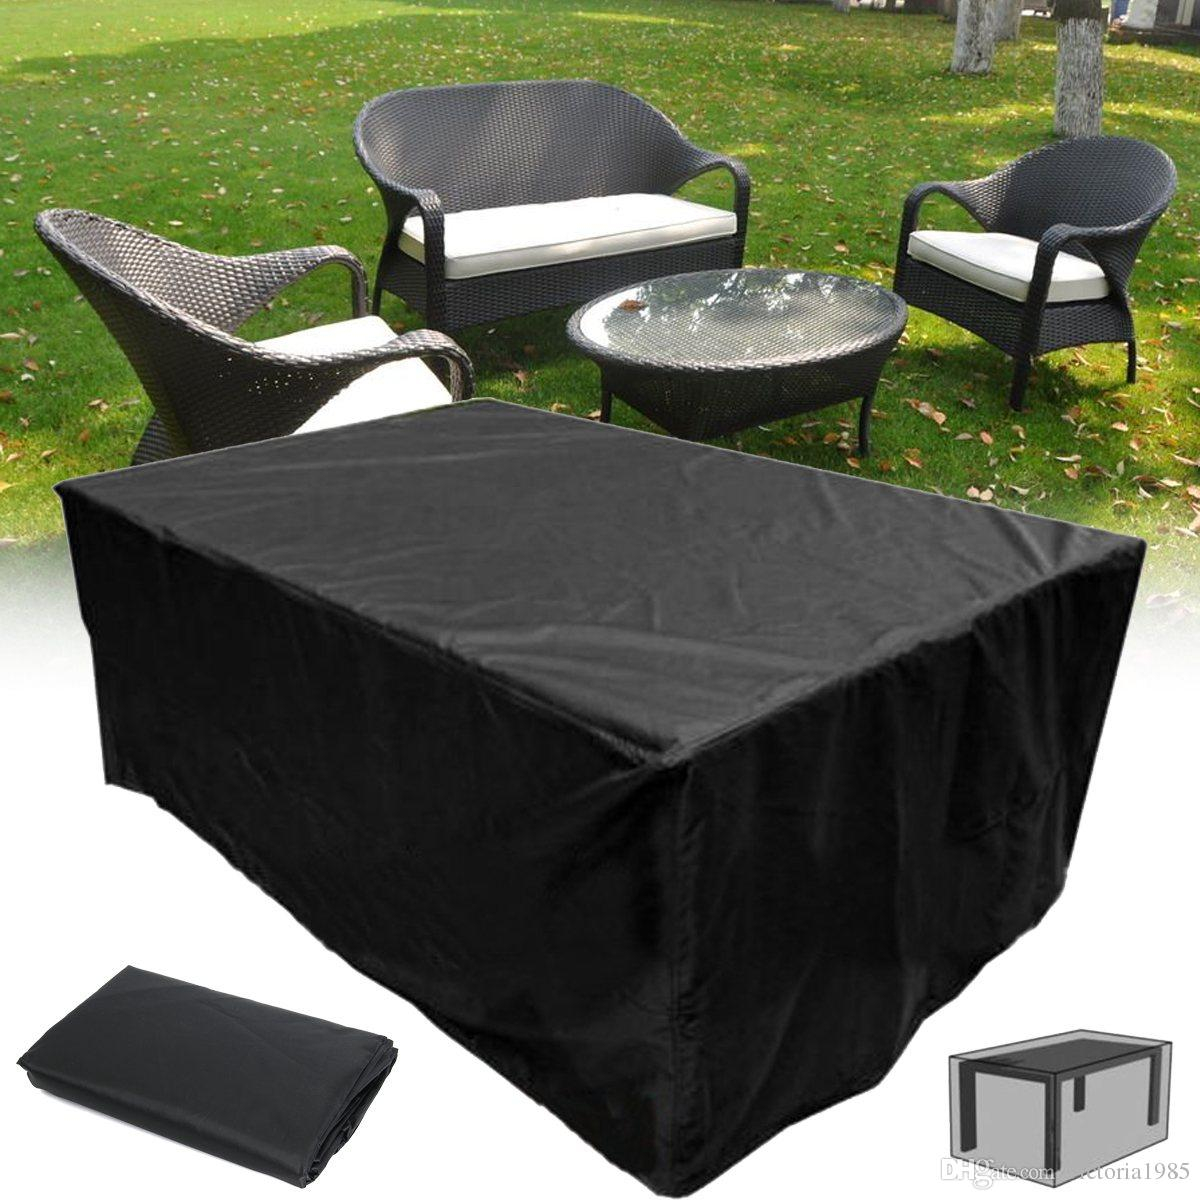 2019 Garden Furniture Home Rain Cover Waterproof Oxford Wicker Sofa Protection Set Garden Patio Rain Snow Dustproof Black Covers From Victorianiu intended for size 1200 X 1200